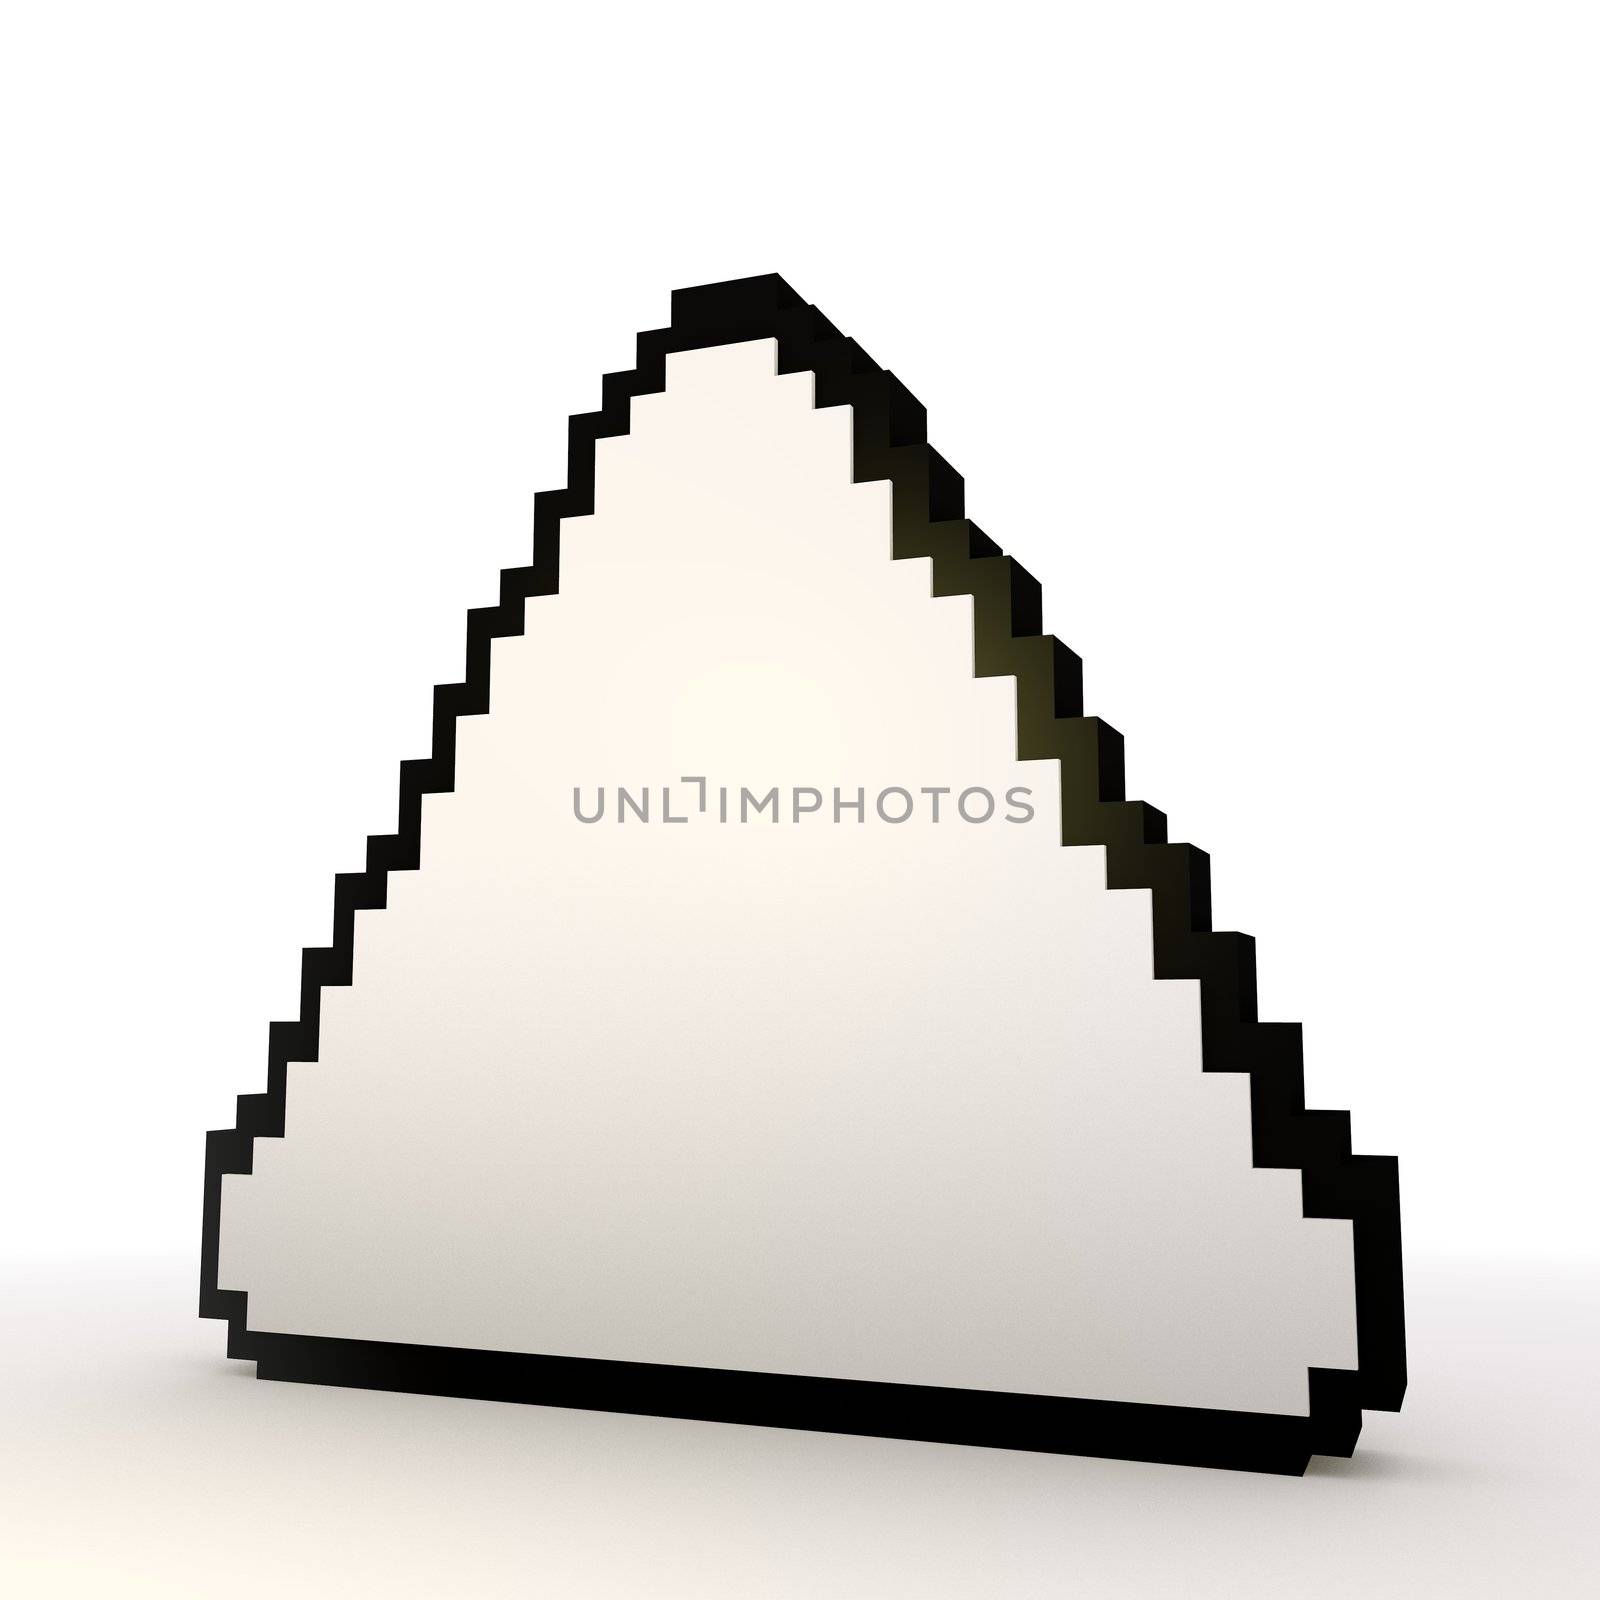 3D graphic triangle symbol in a stylish white background